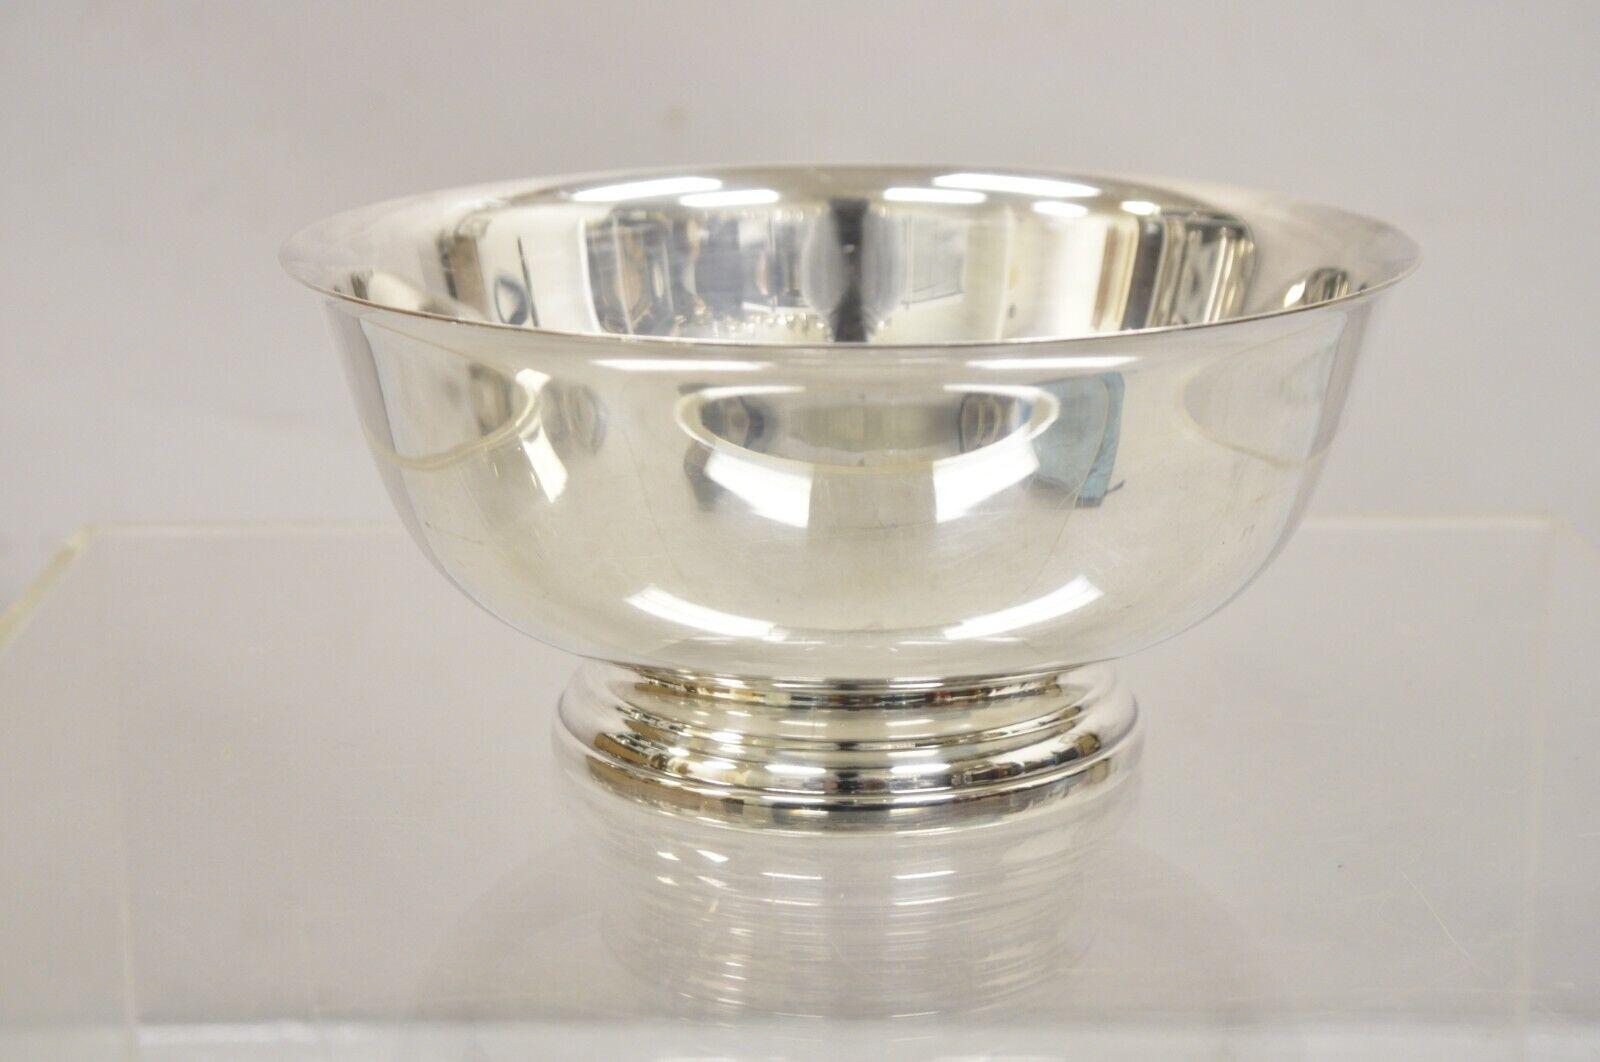 Vintage Gorham EP YC781 Silver Plated Atlantic City Racing Trophy Award Bowl For Sale 5